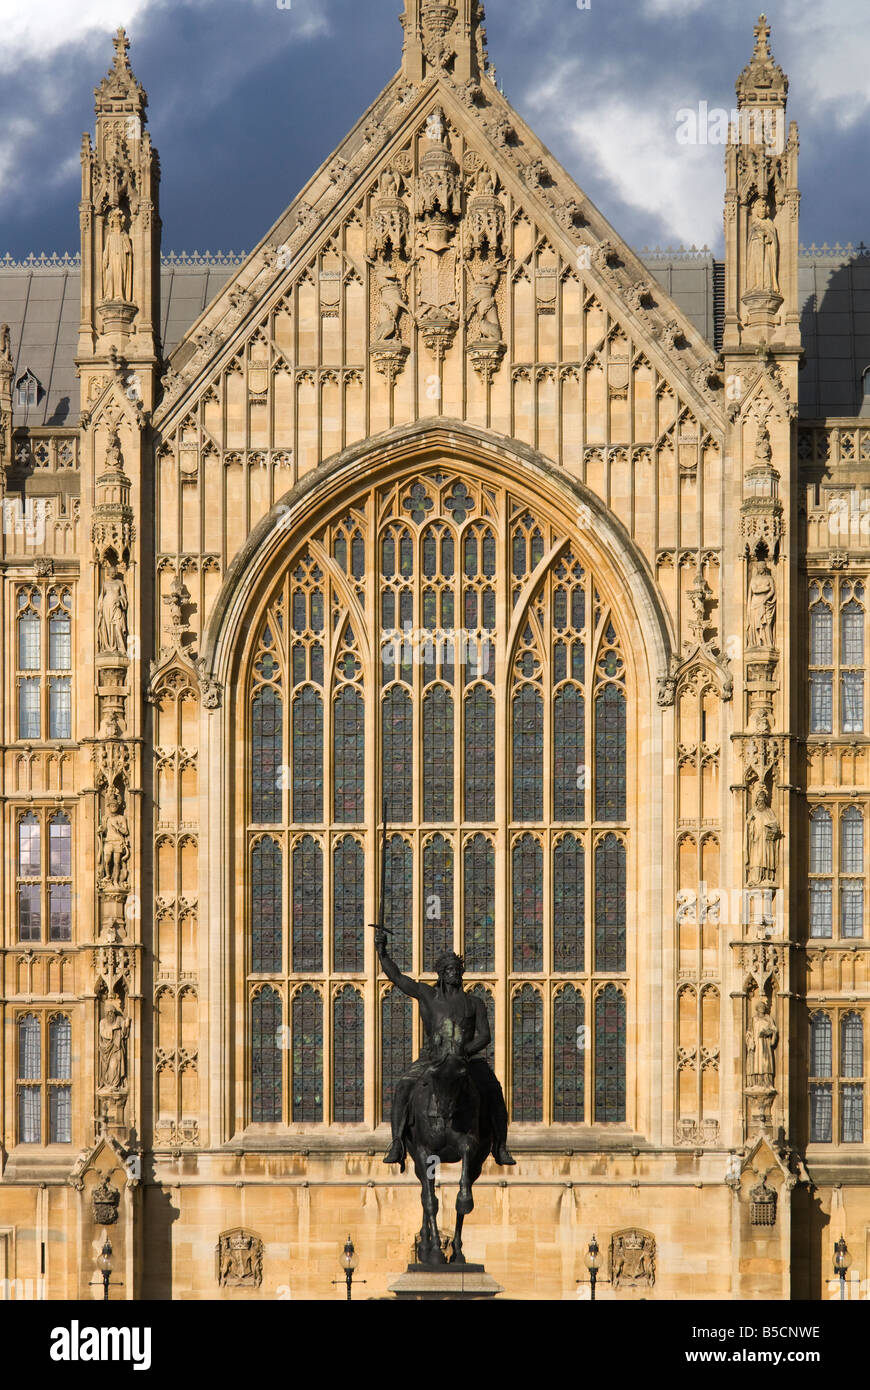 Statue of Richard the Lionheart in front of the Palace of Westminster 3 Stock Photo